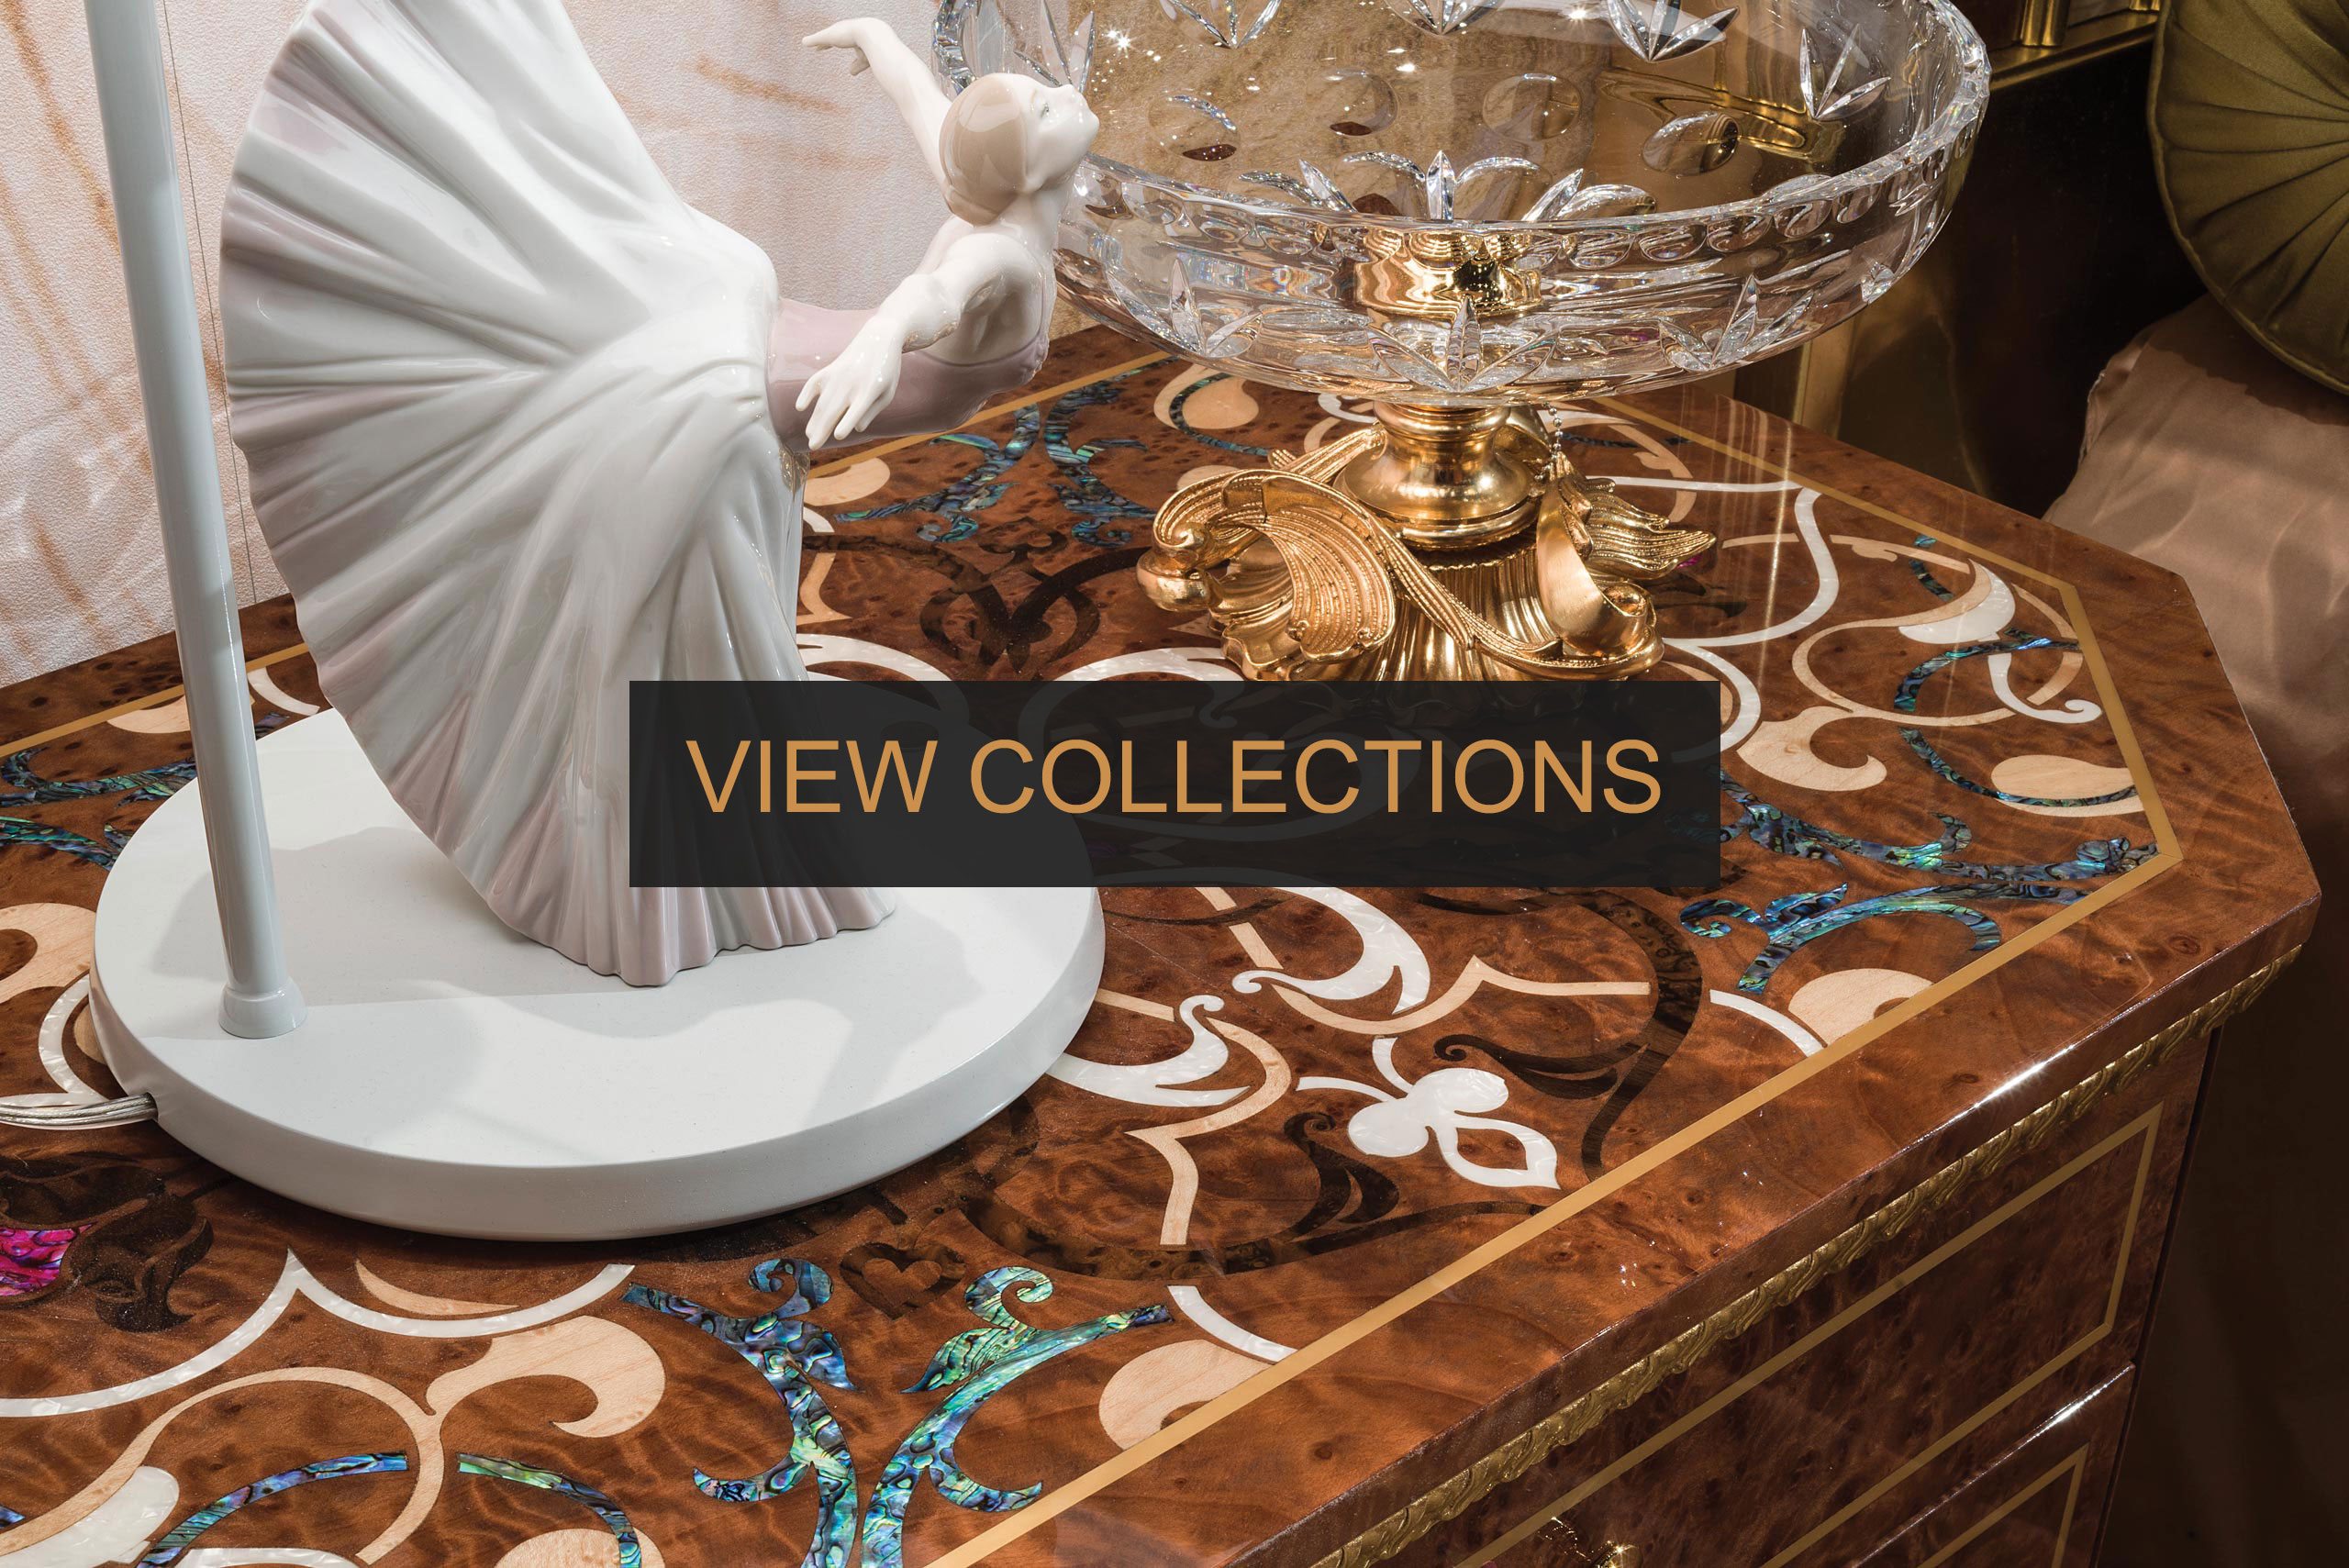 DISCOVER COLLECTION